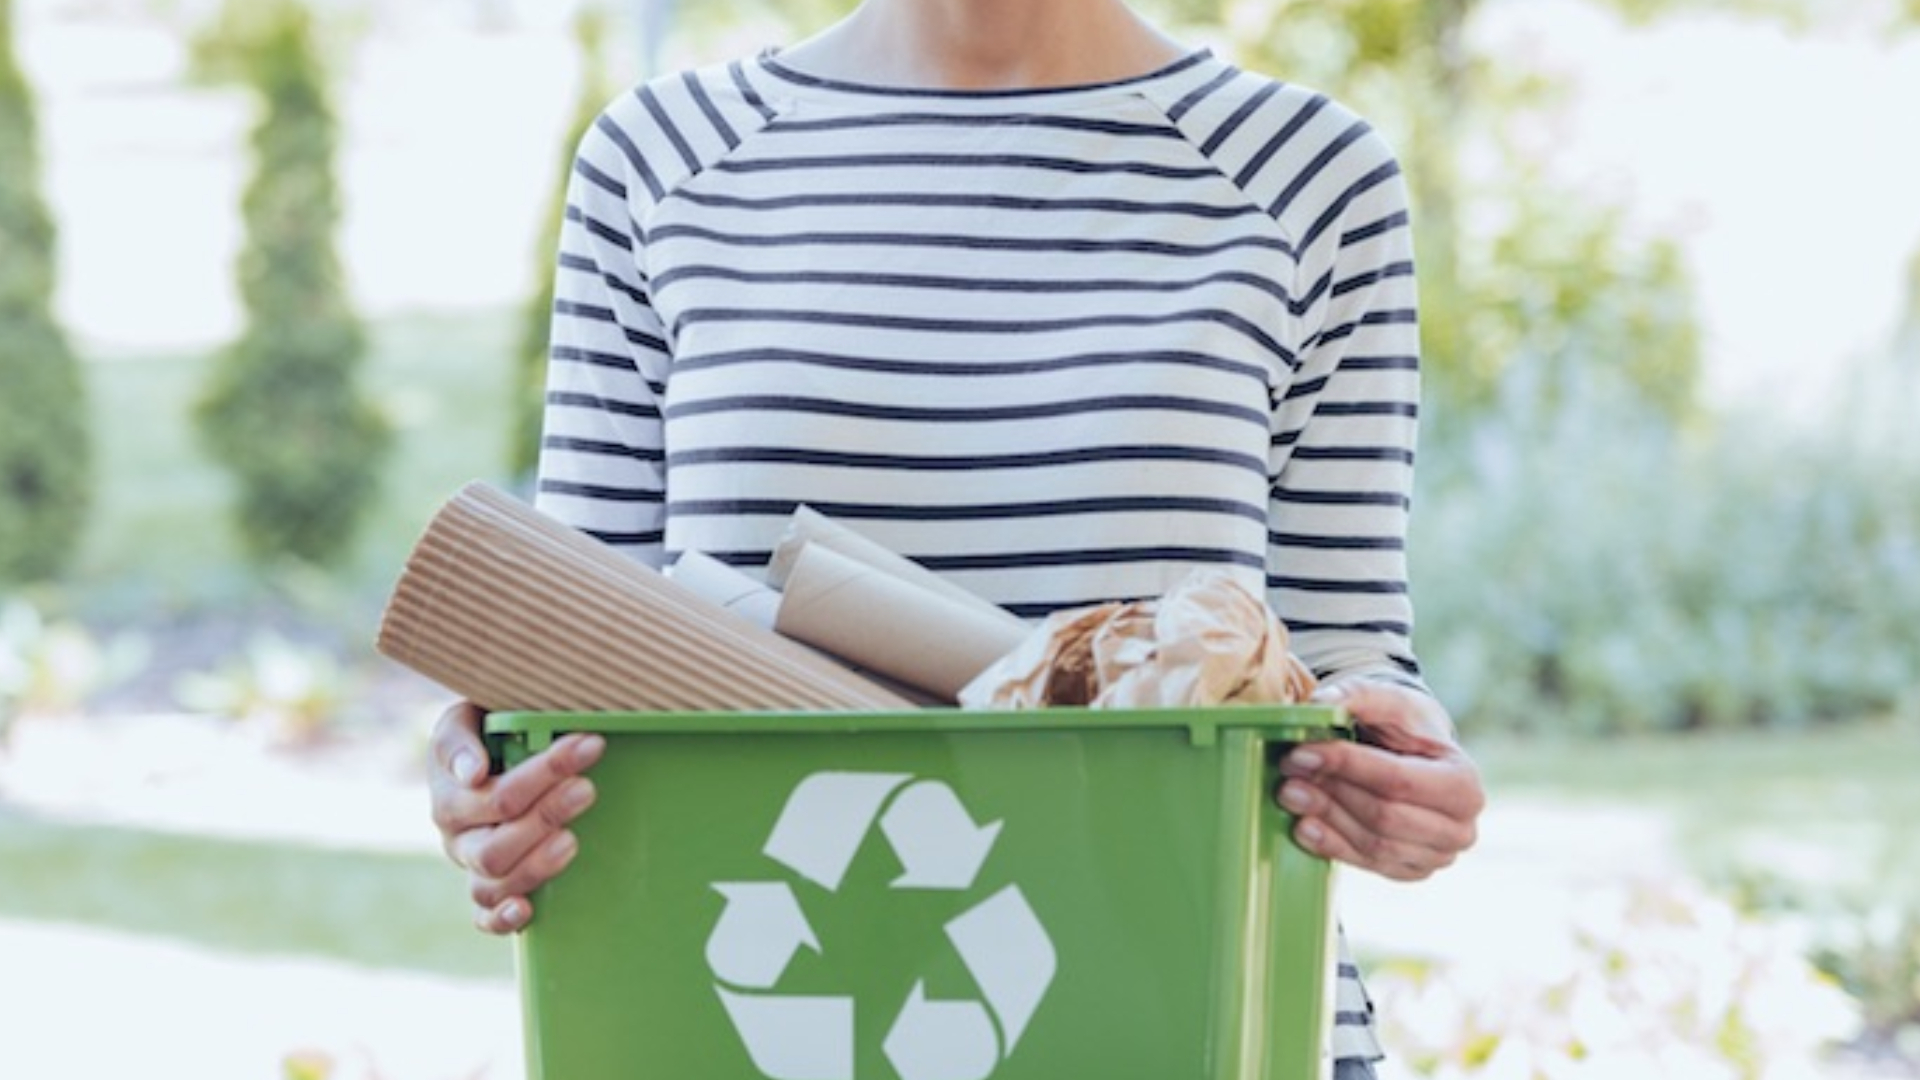 Simple ways to reduce your daily household waste